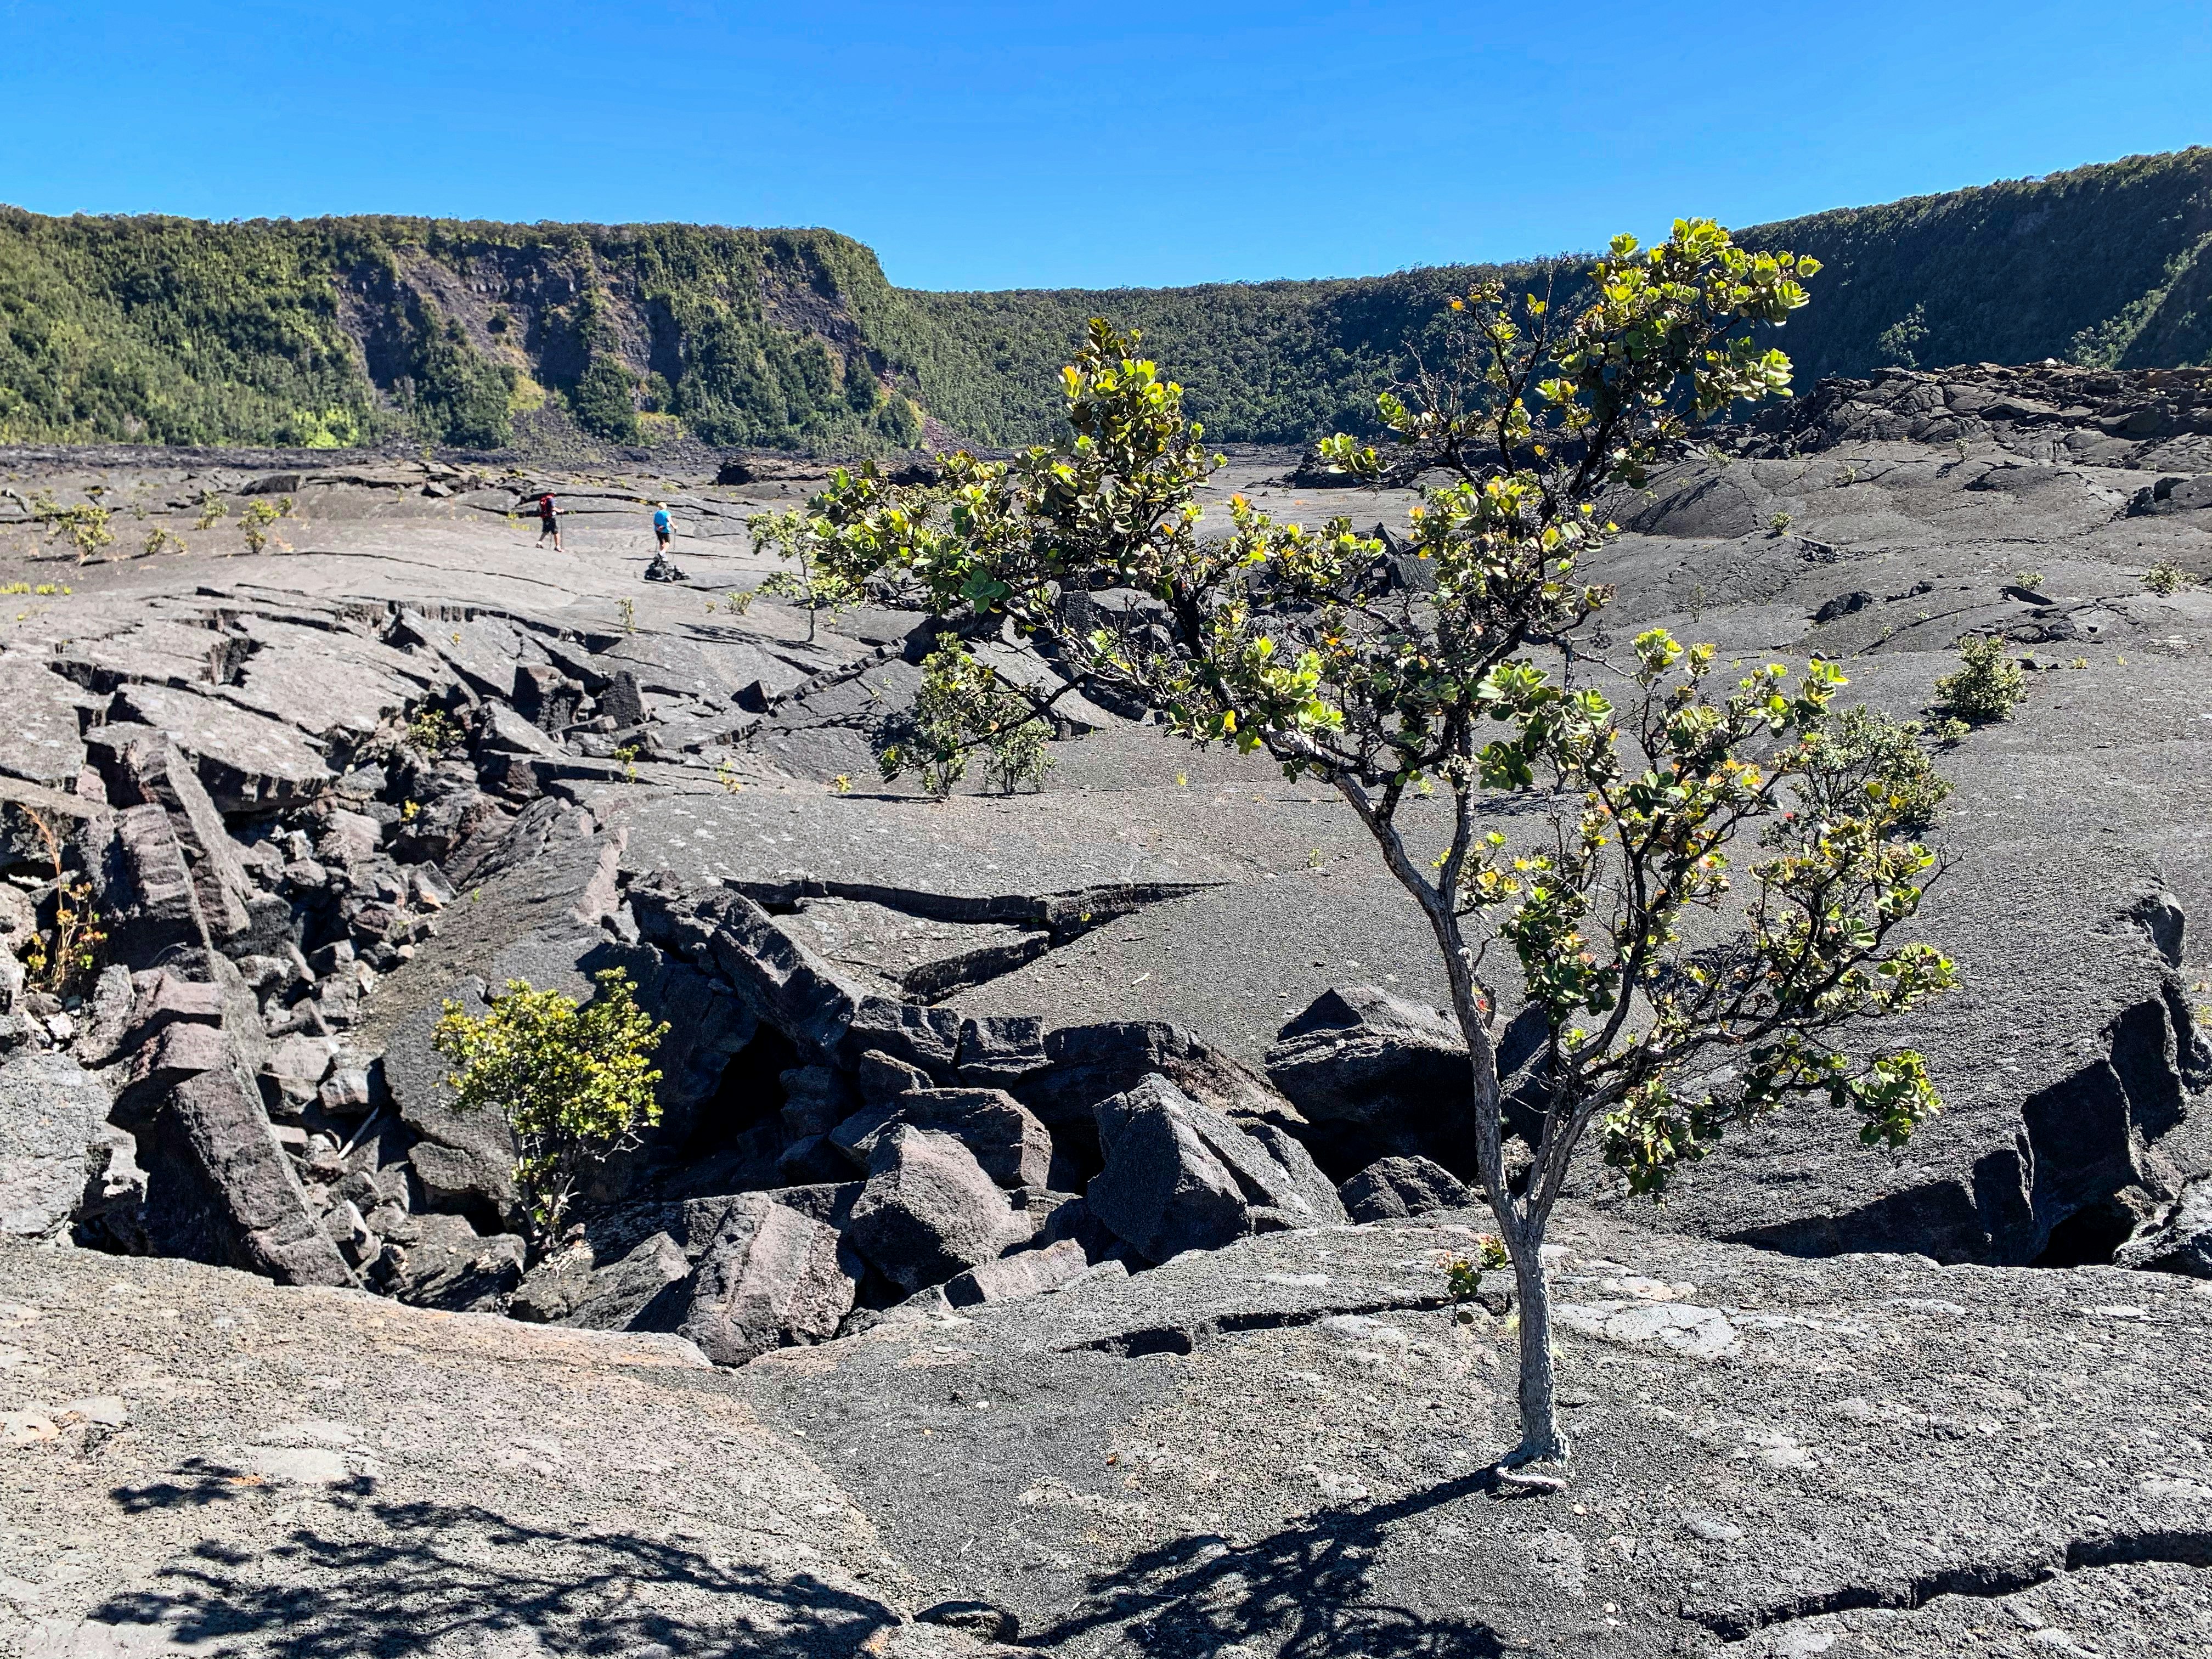 Park visitors walk across the Kilauea Iki (Little Kilauea) Crater floor; the ground is fissured and barren, save for ohia trees growing from the rock.